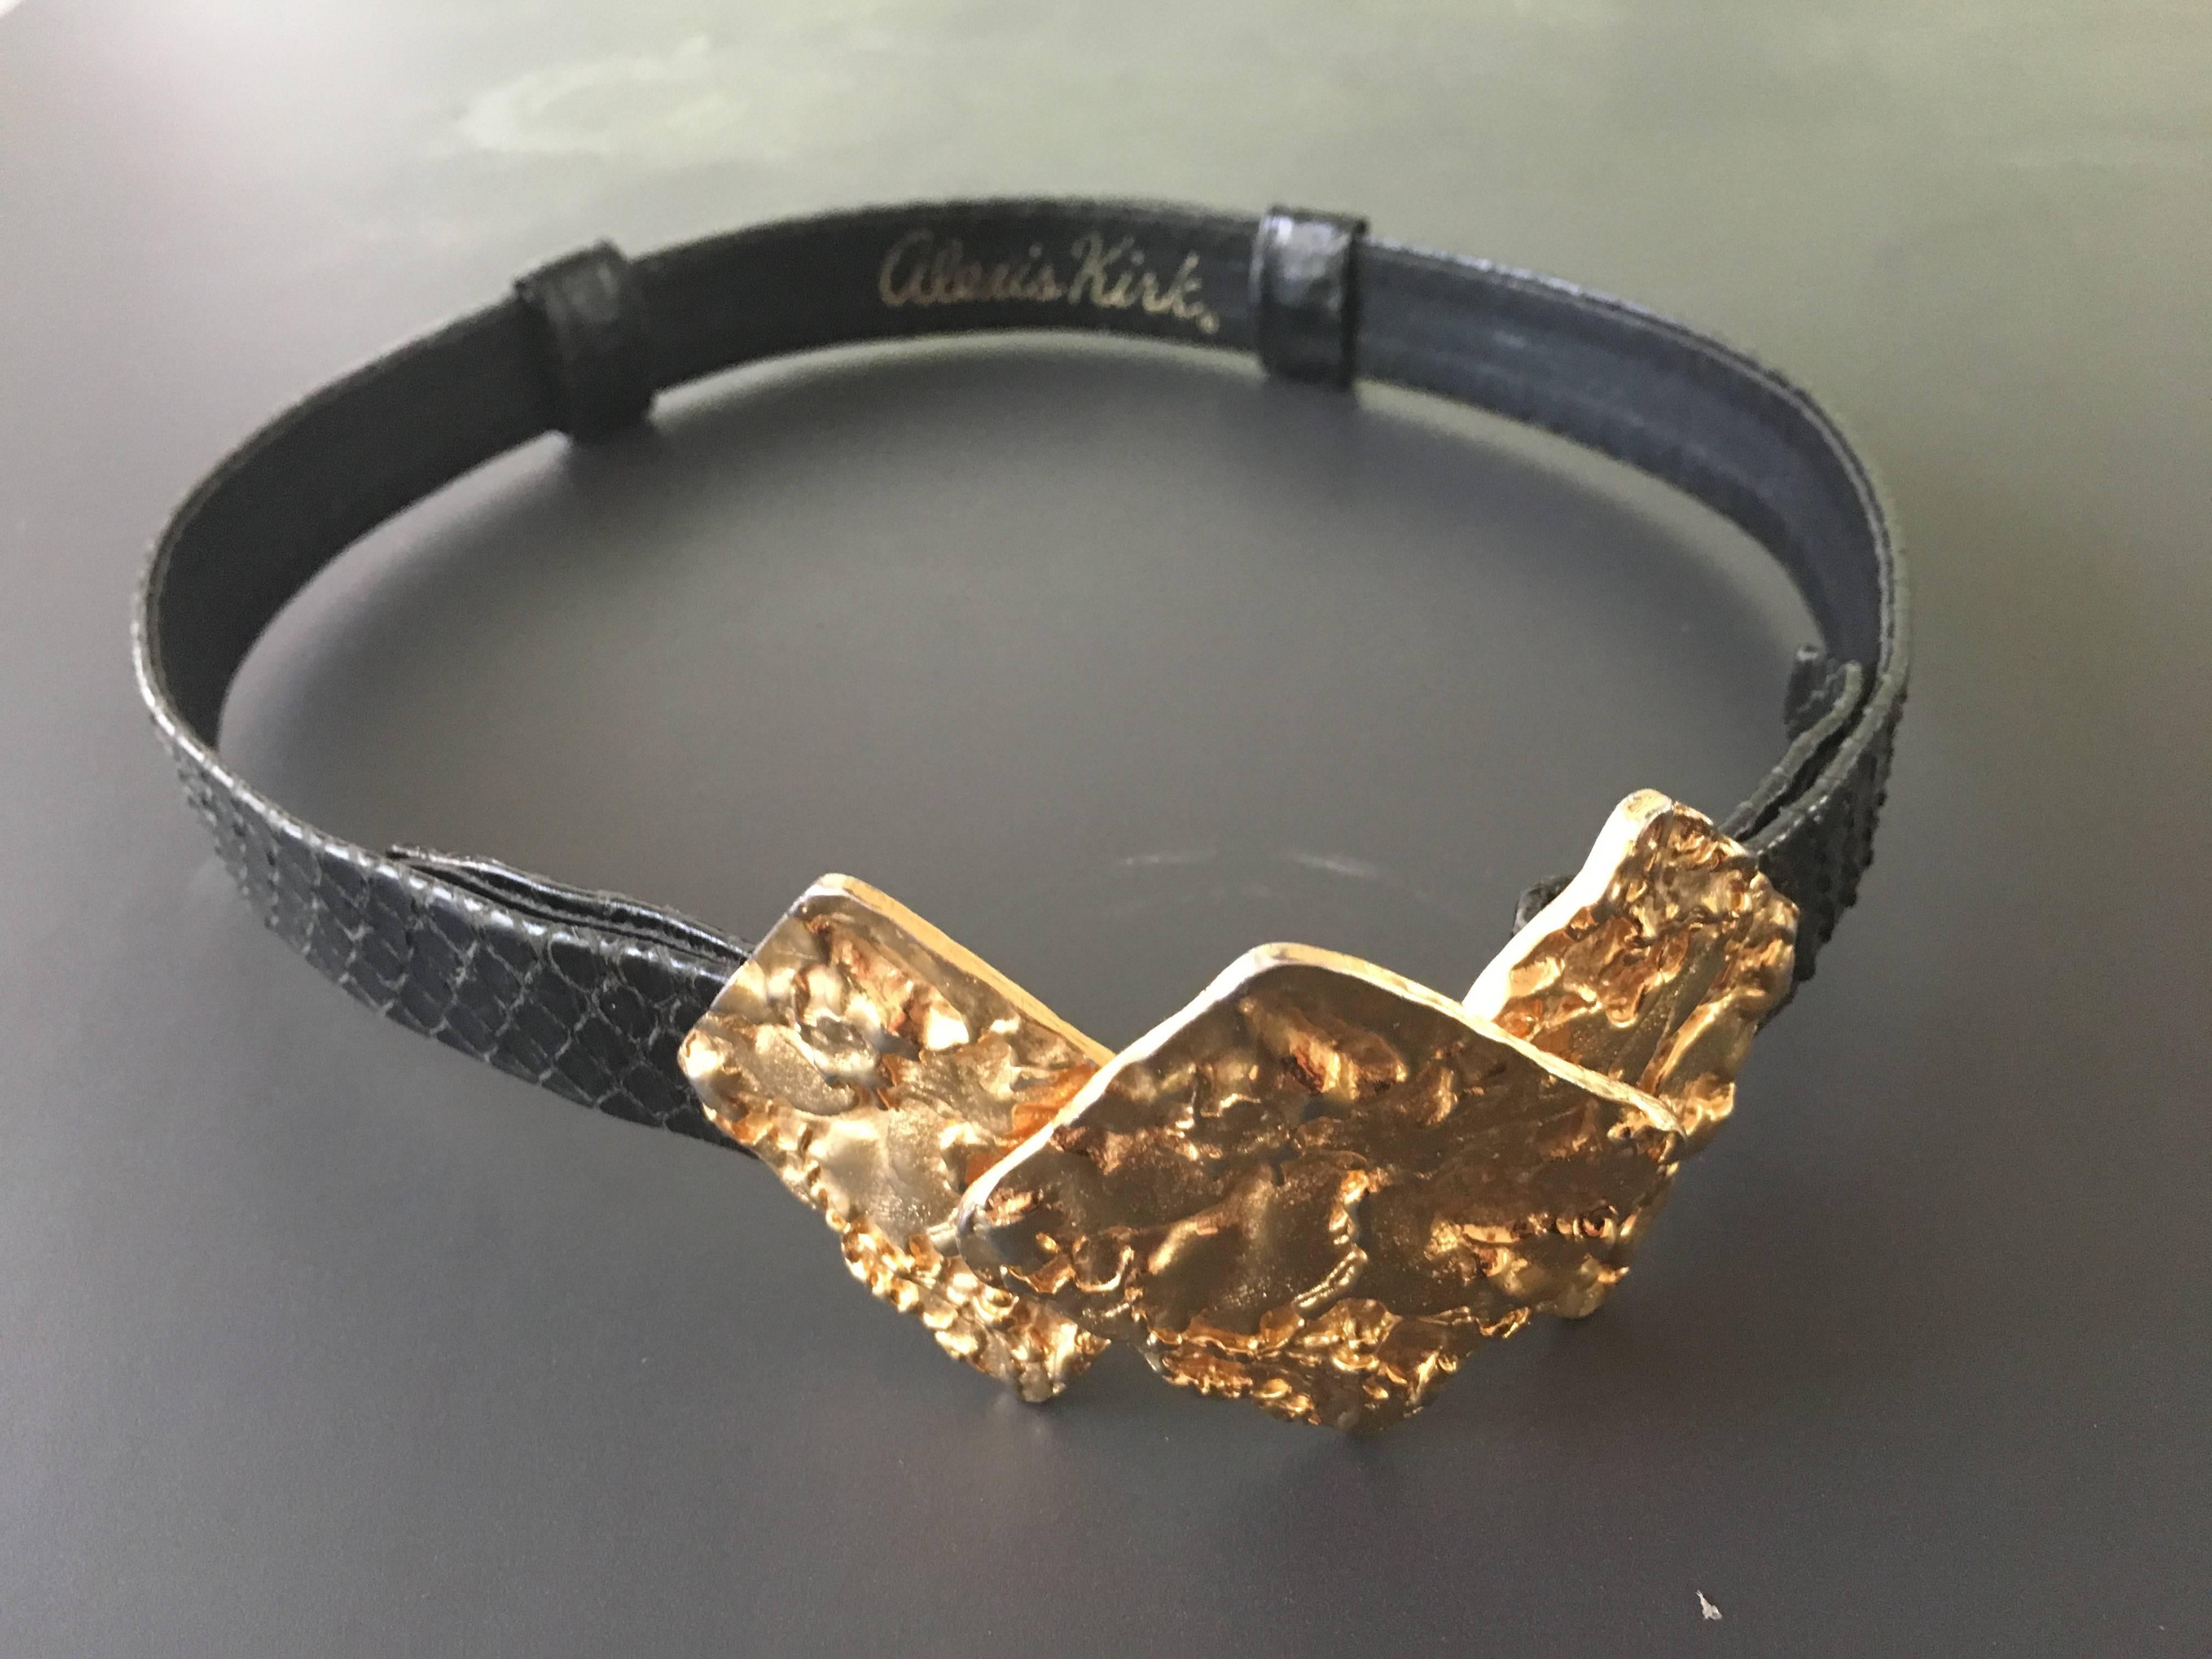 Alexis Kirk 1980s gold abstract buckle with black snake skin adjustable belt. This is the only belt you will ever need to own because it goes with jeans, skirts & dresses. On a scale from 1-10 this is off the chart. 
Measurements